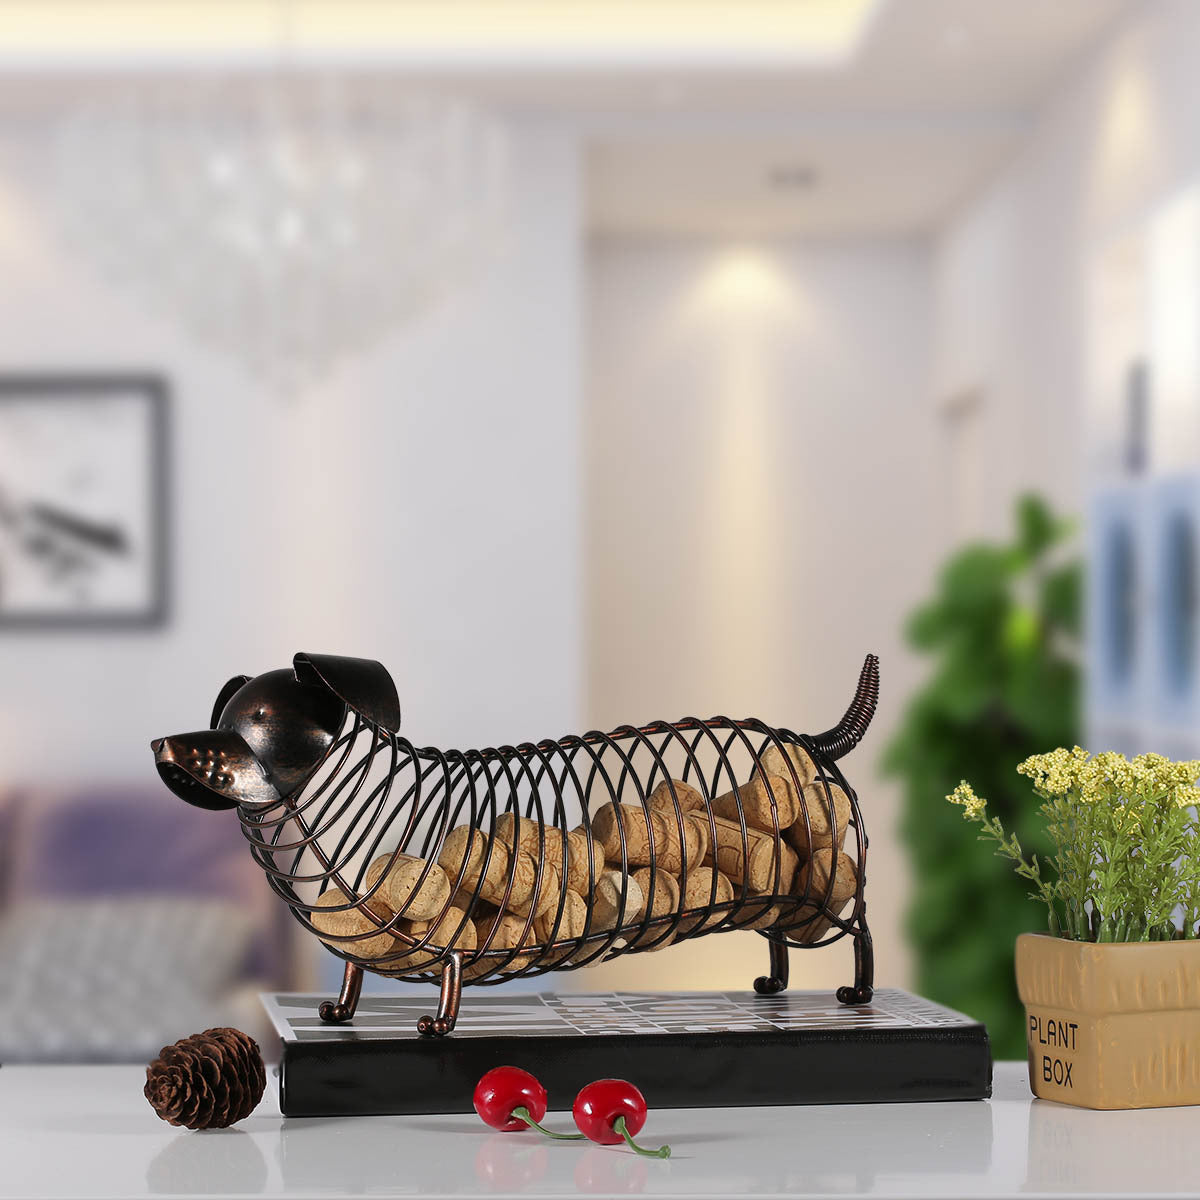 Dachshund Cork Holder - Quirky Charm for Wine Fans